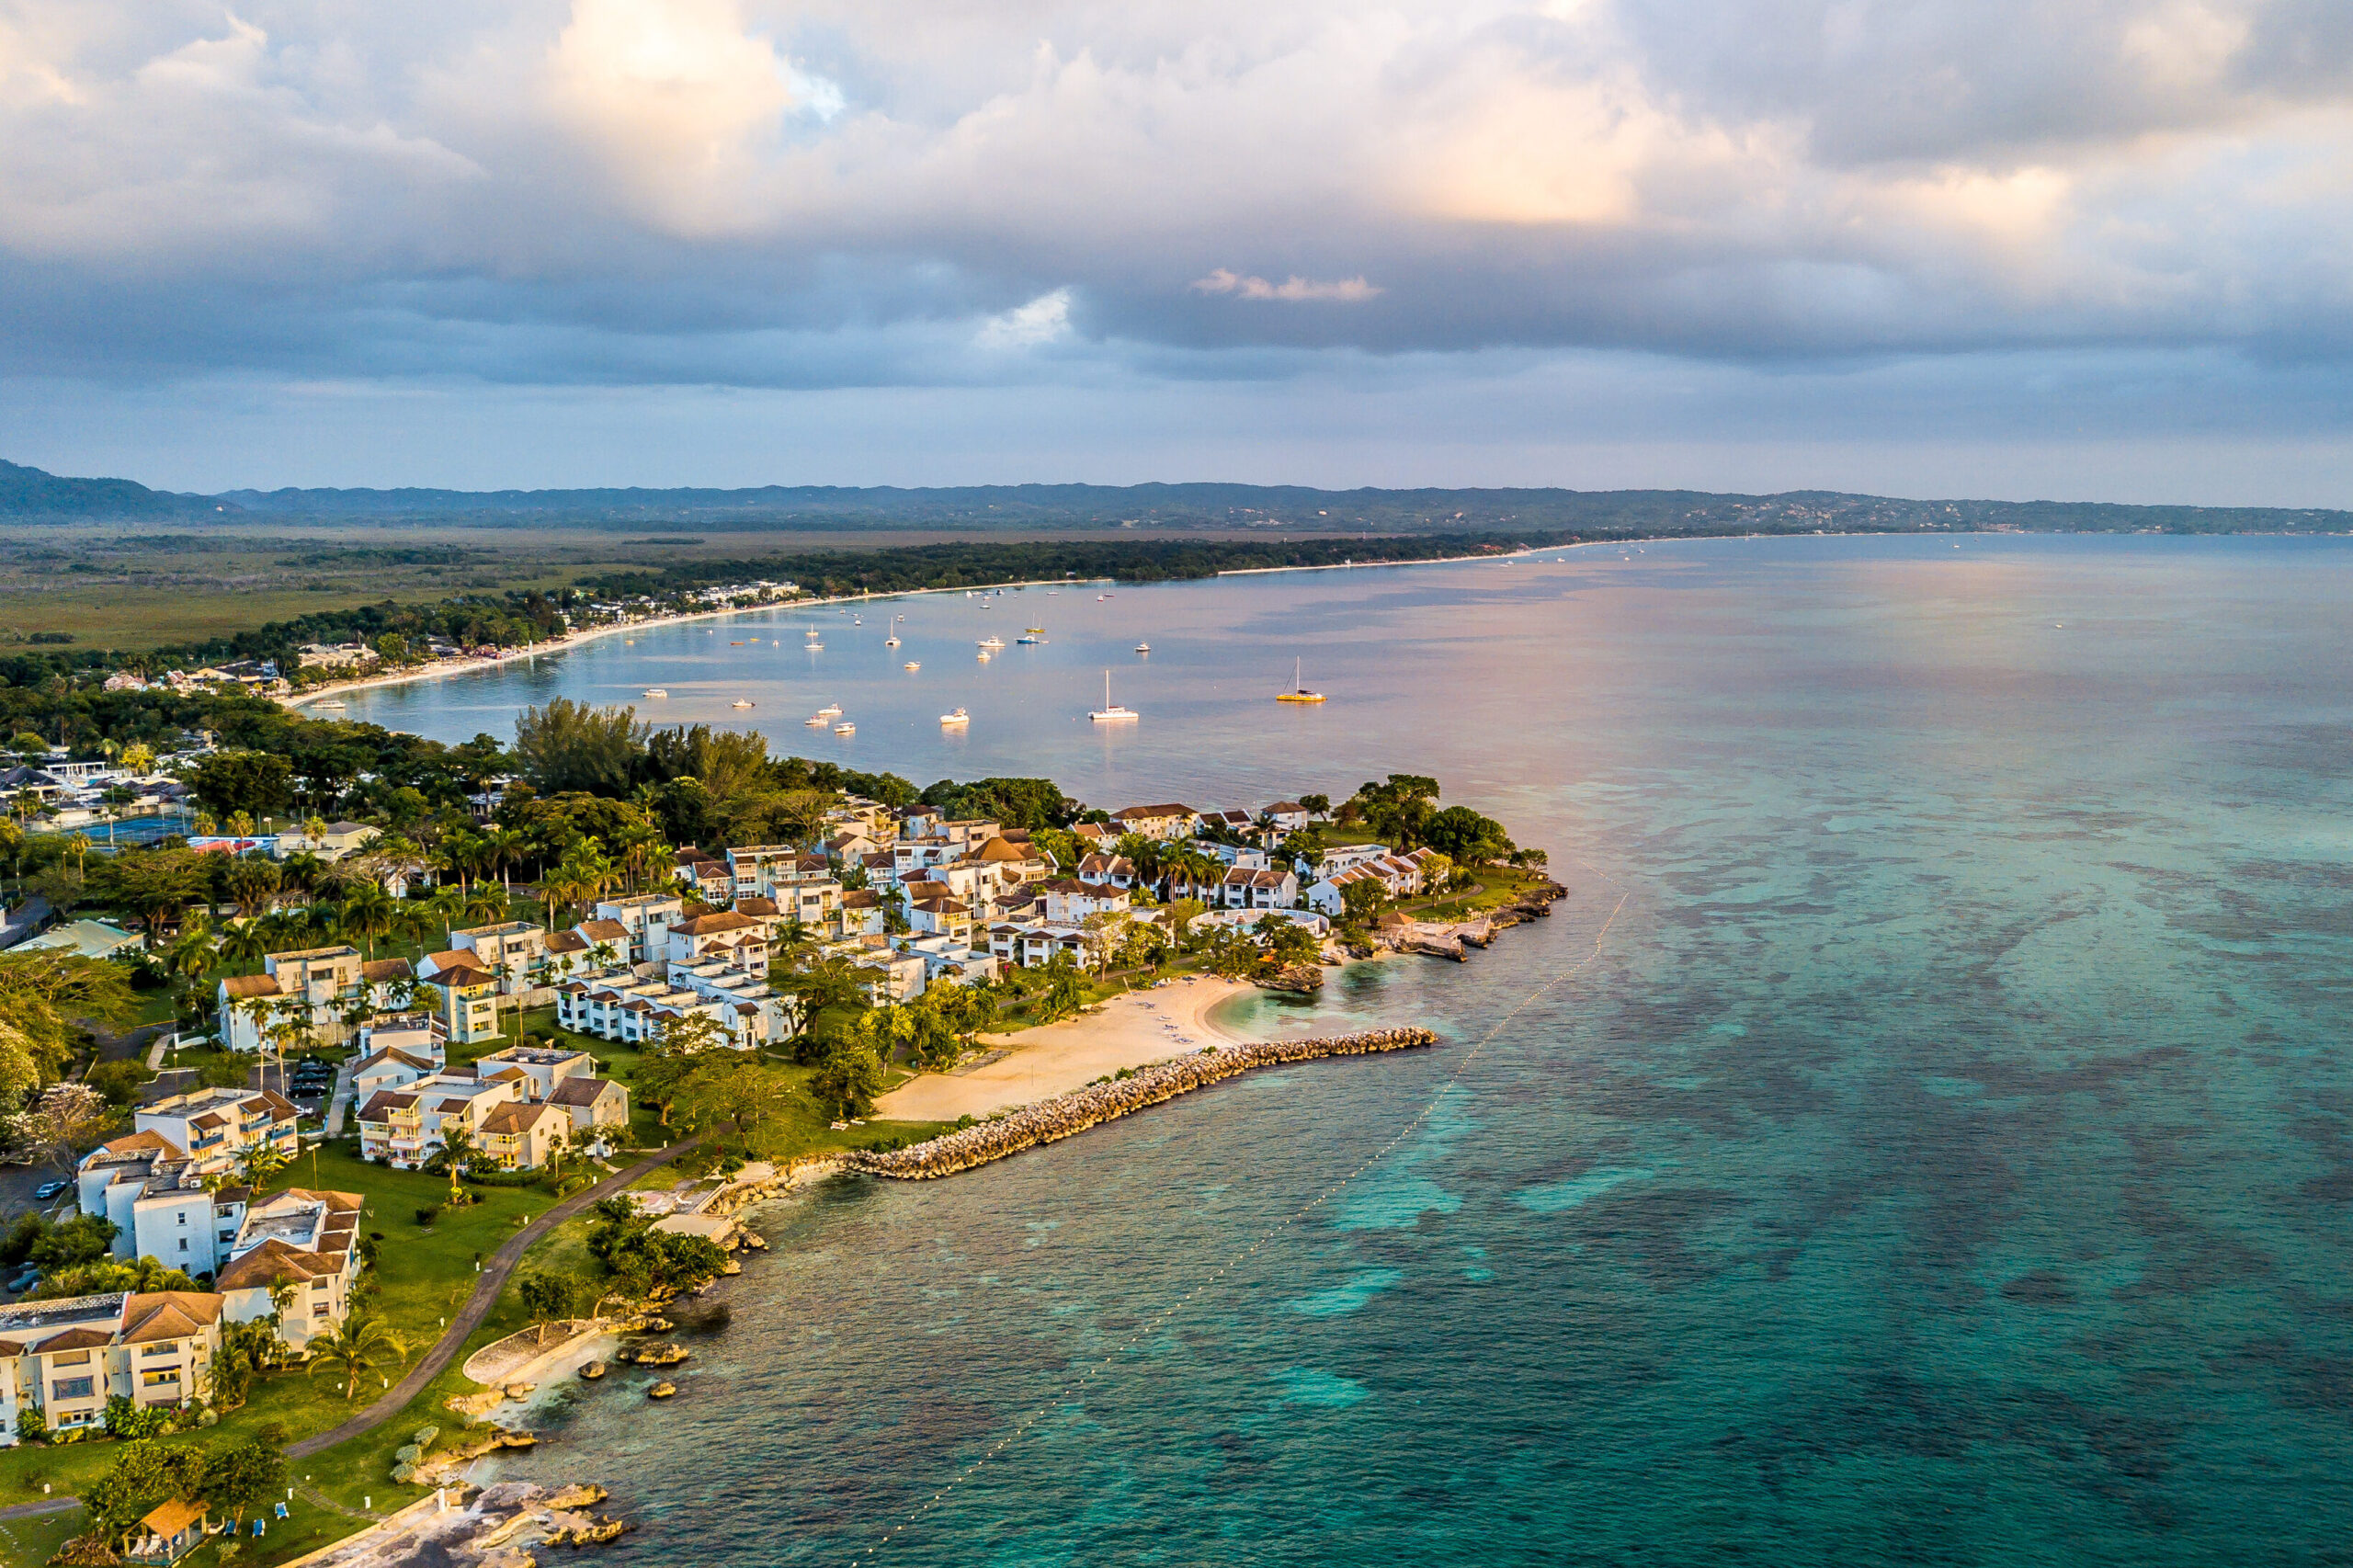 Aerial view of a beach in Negril, Jamaica